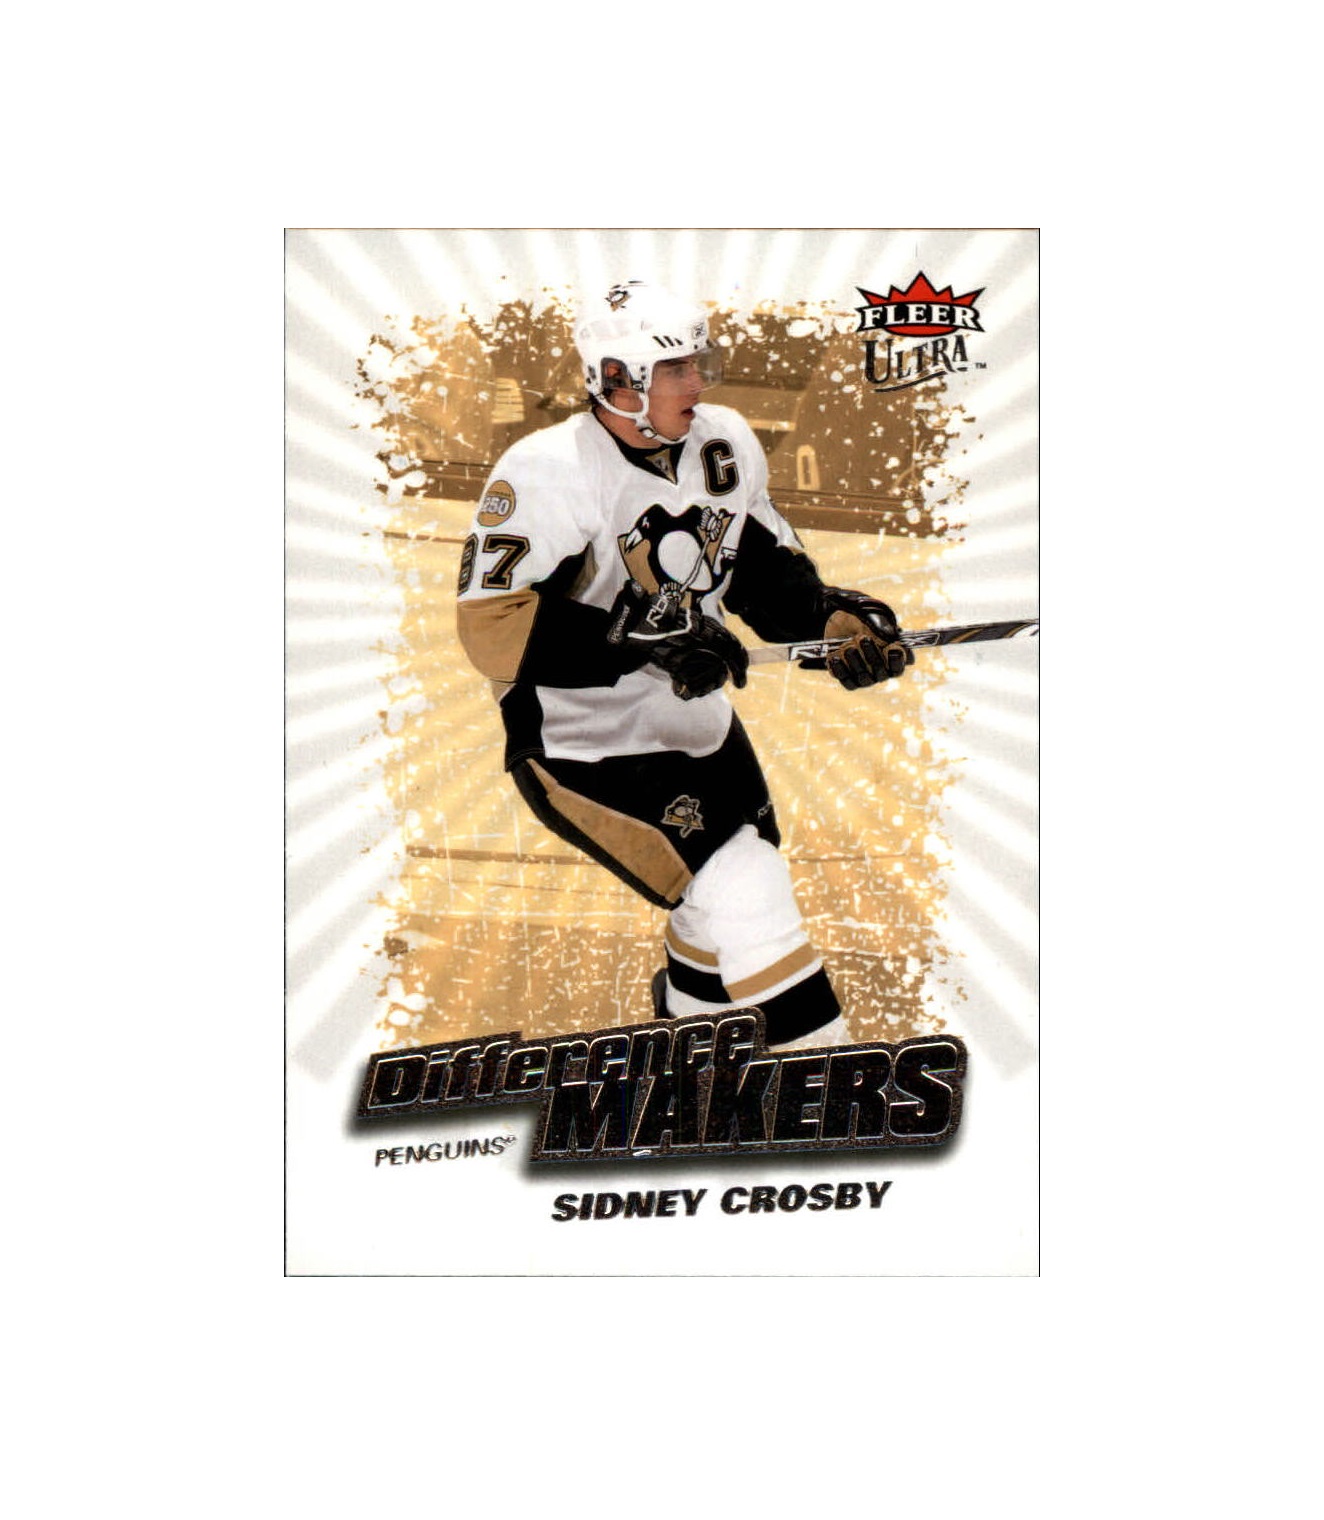 2008-09 Ultra Difference Makers #DM11 Sidney Crosby (25-X60-PENGUINS)